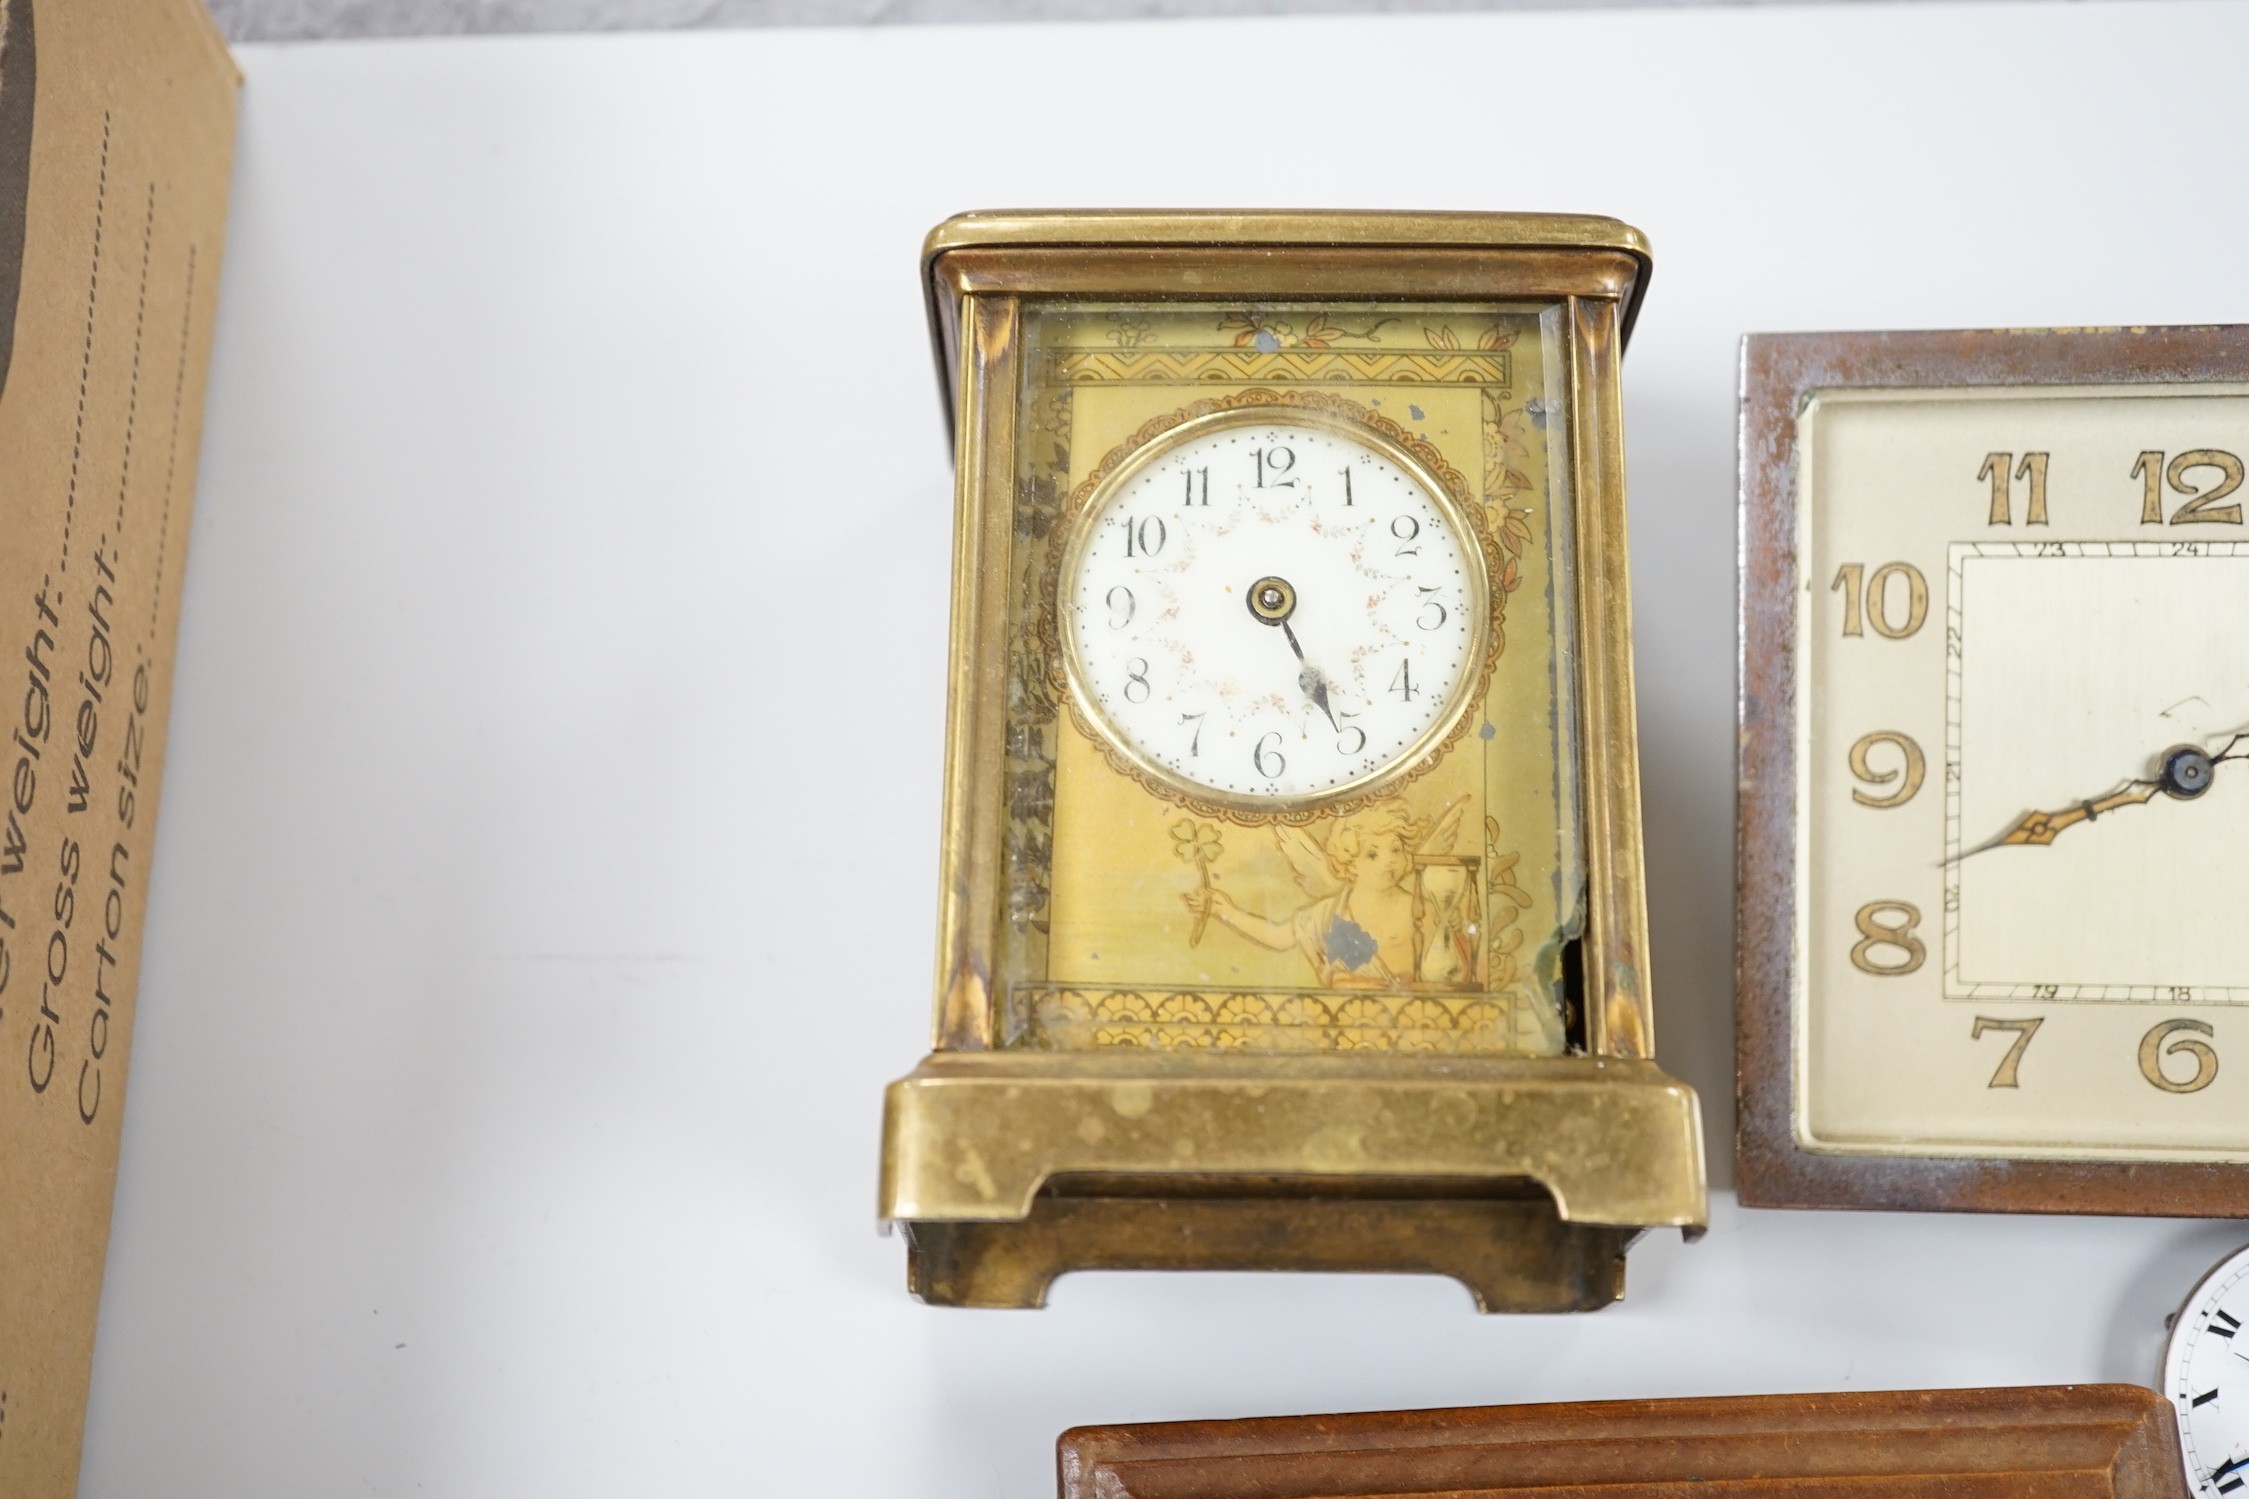 A group of wrist and pocket watches, stop watch, carriage clock, etc.